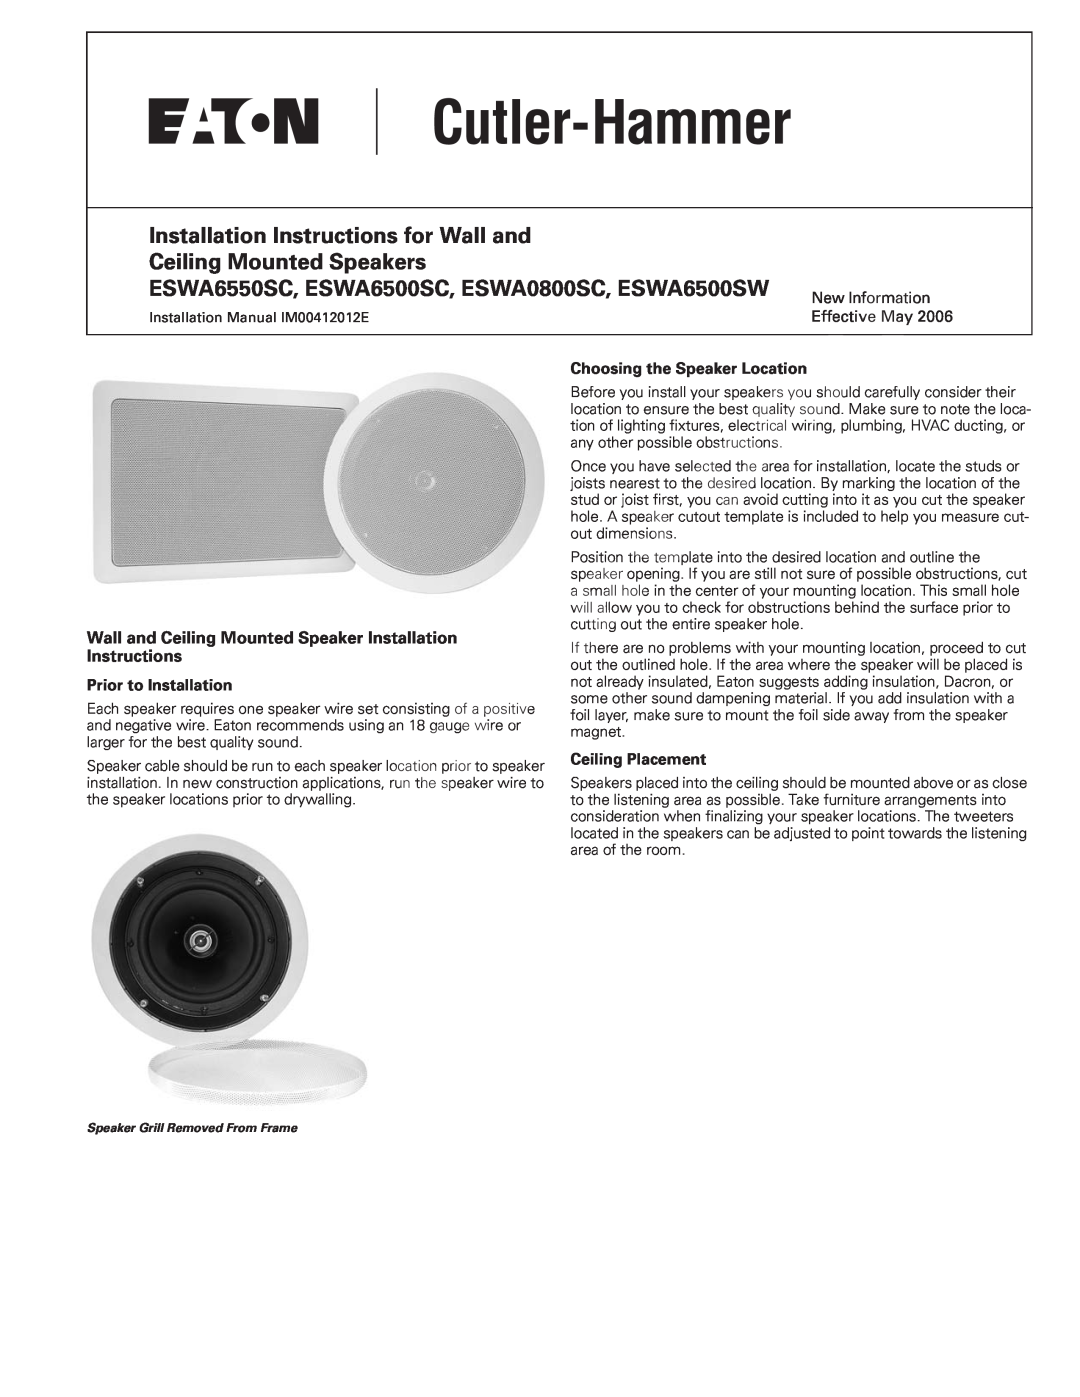 Eaton Electrical ESWA6550SC, ESWA6500SW installation instructions Prior to Installation, Choosing the Speaker Location 